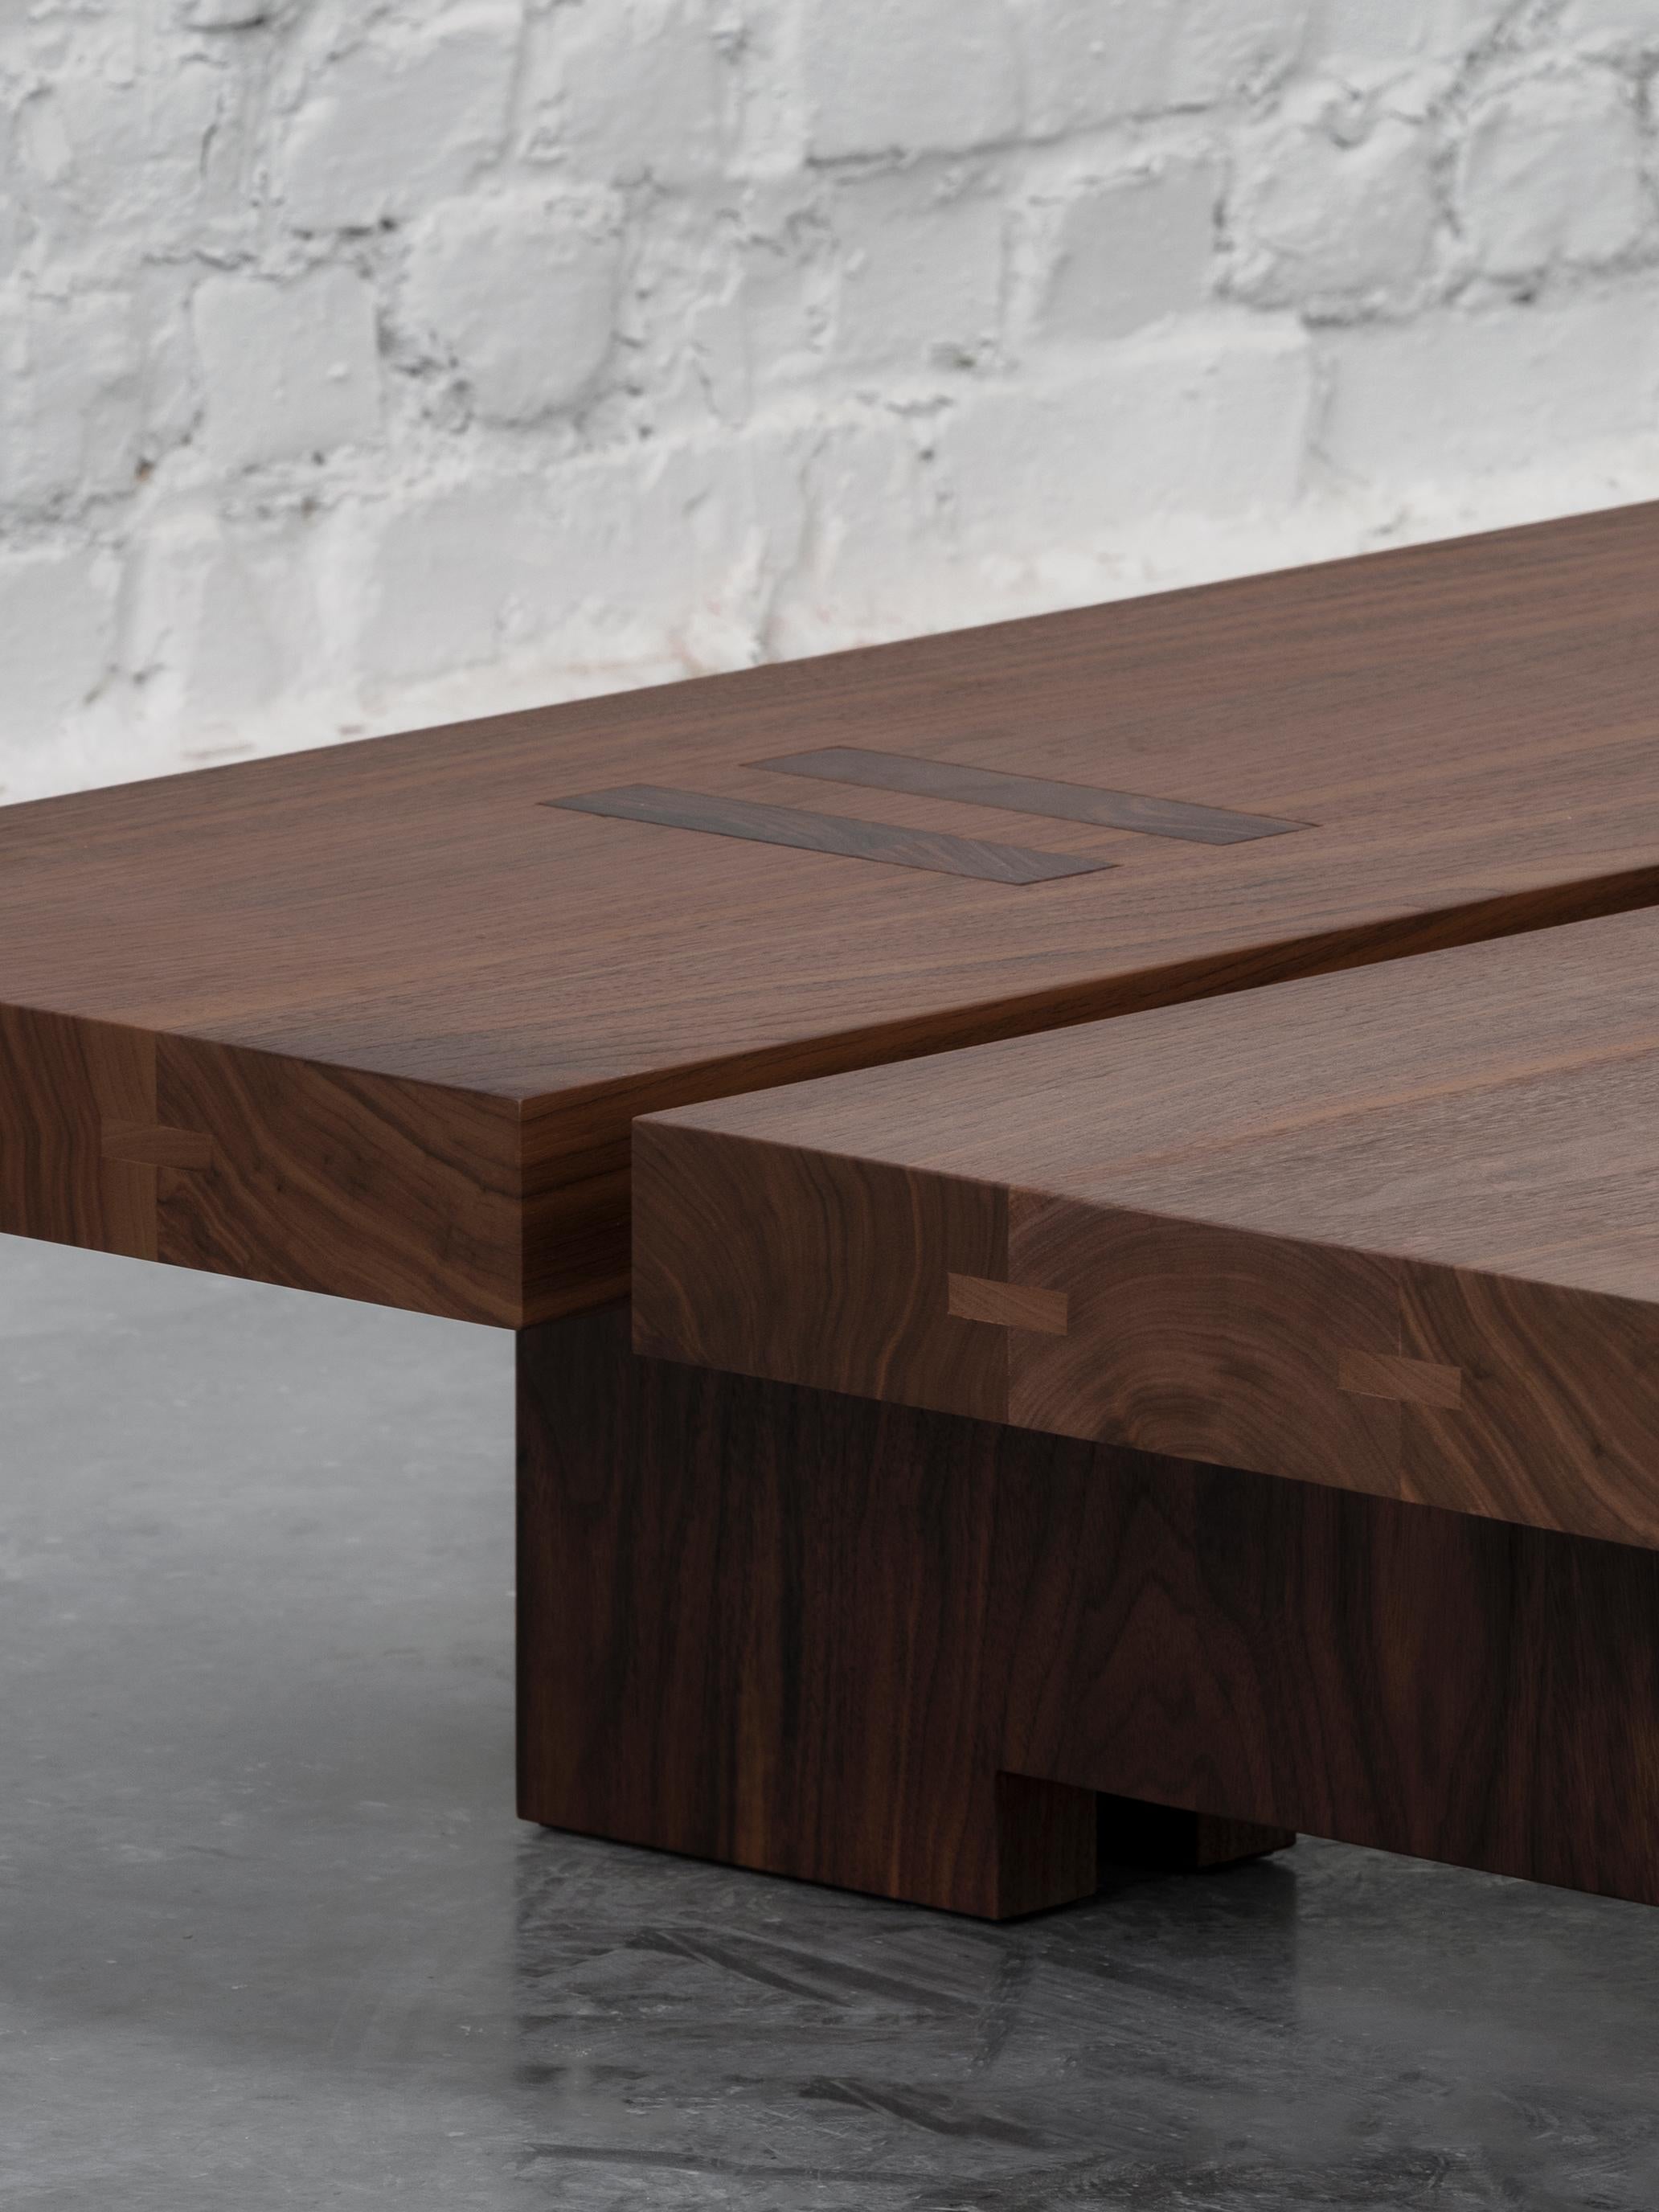 Post-Modern Rift Wood Coffee Table by Andy Kerstens